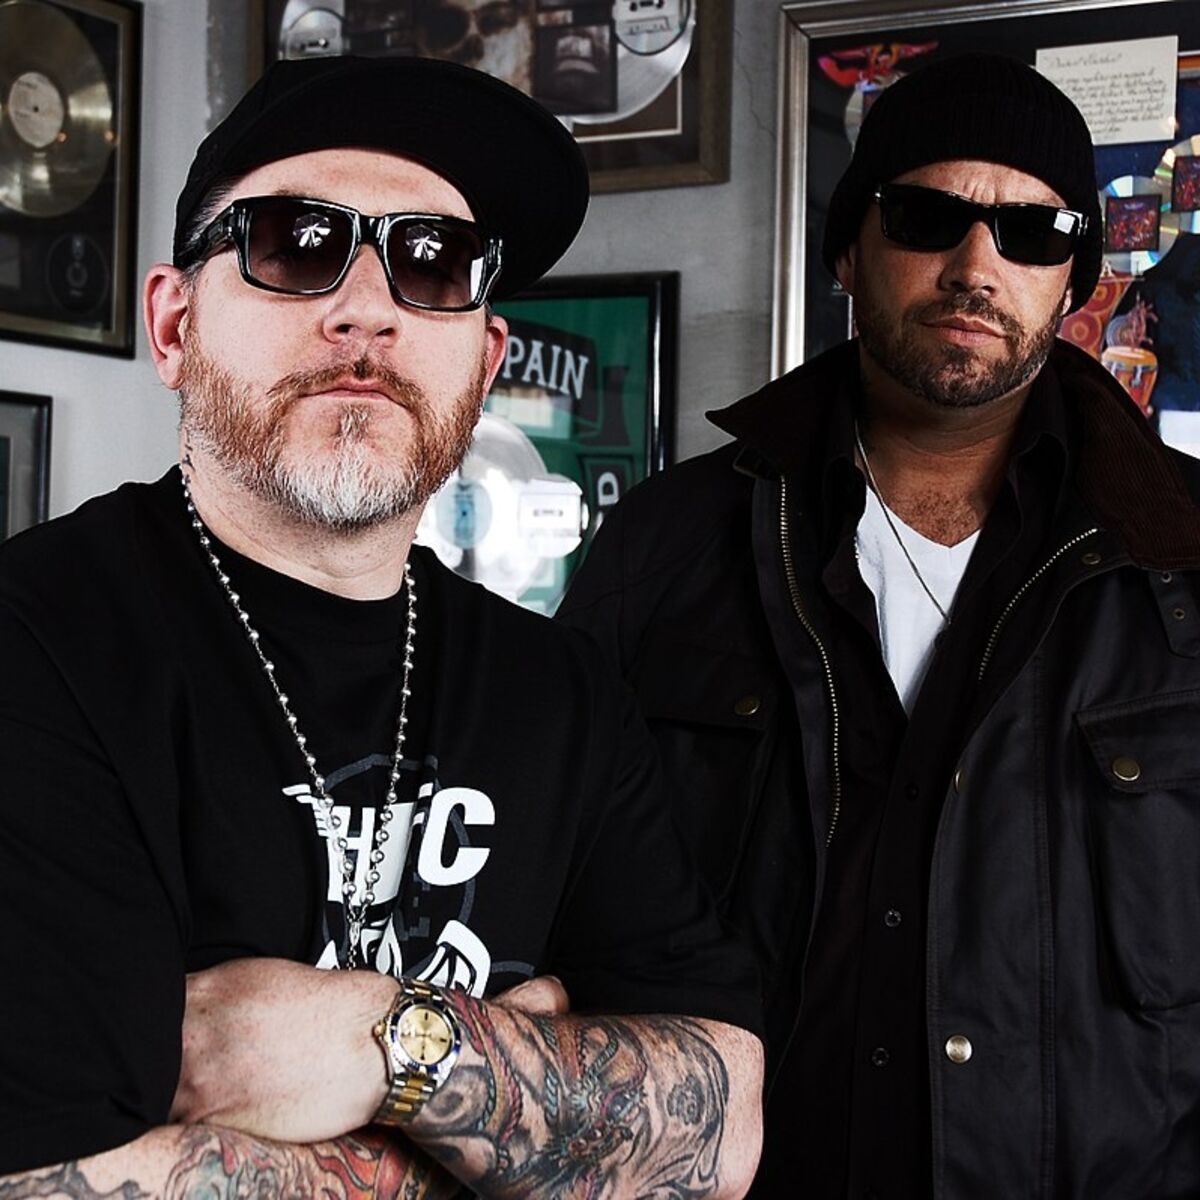 House Of Pain: albums, songs, playlists | Listen on Deezer